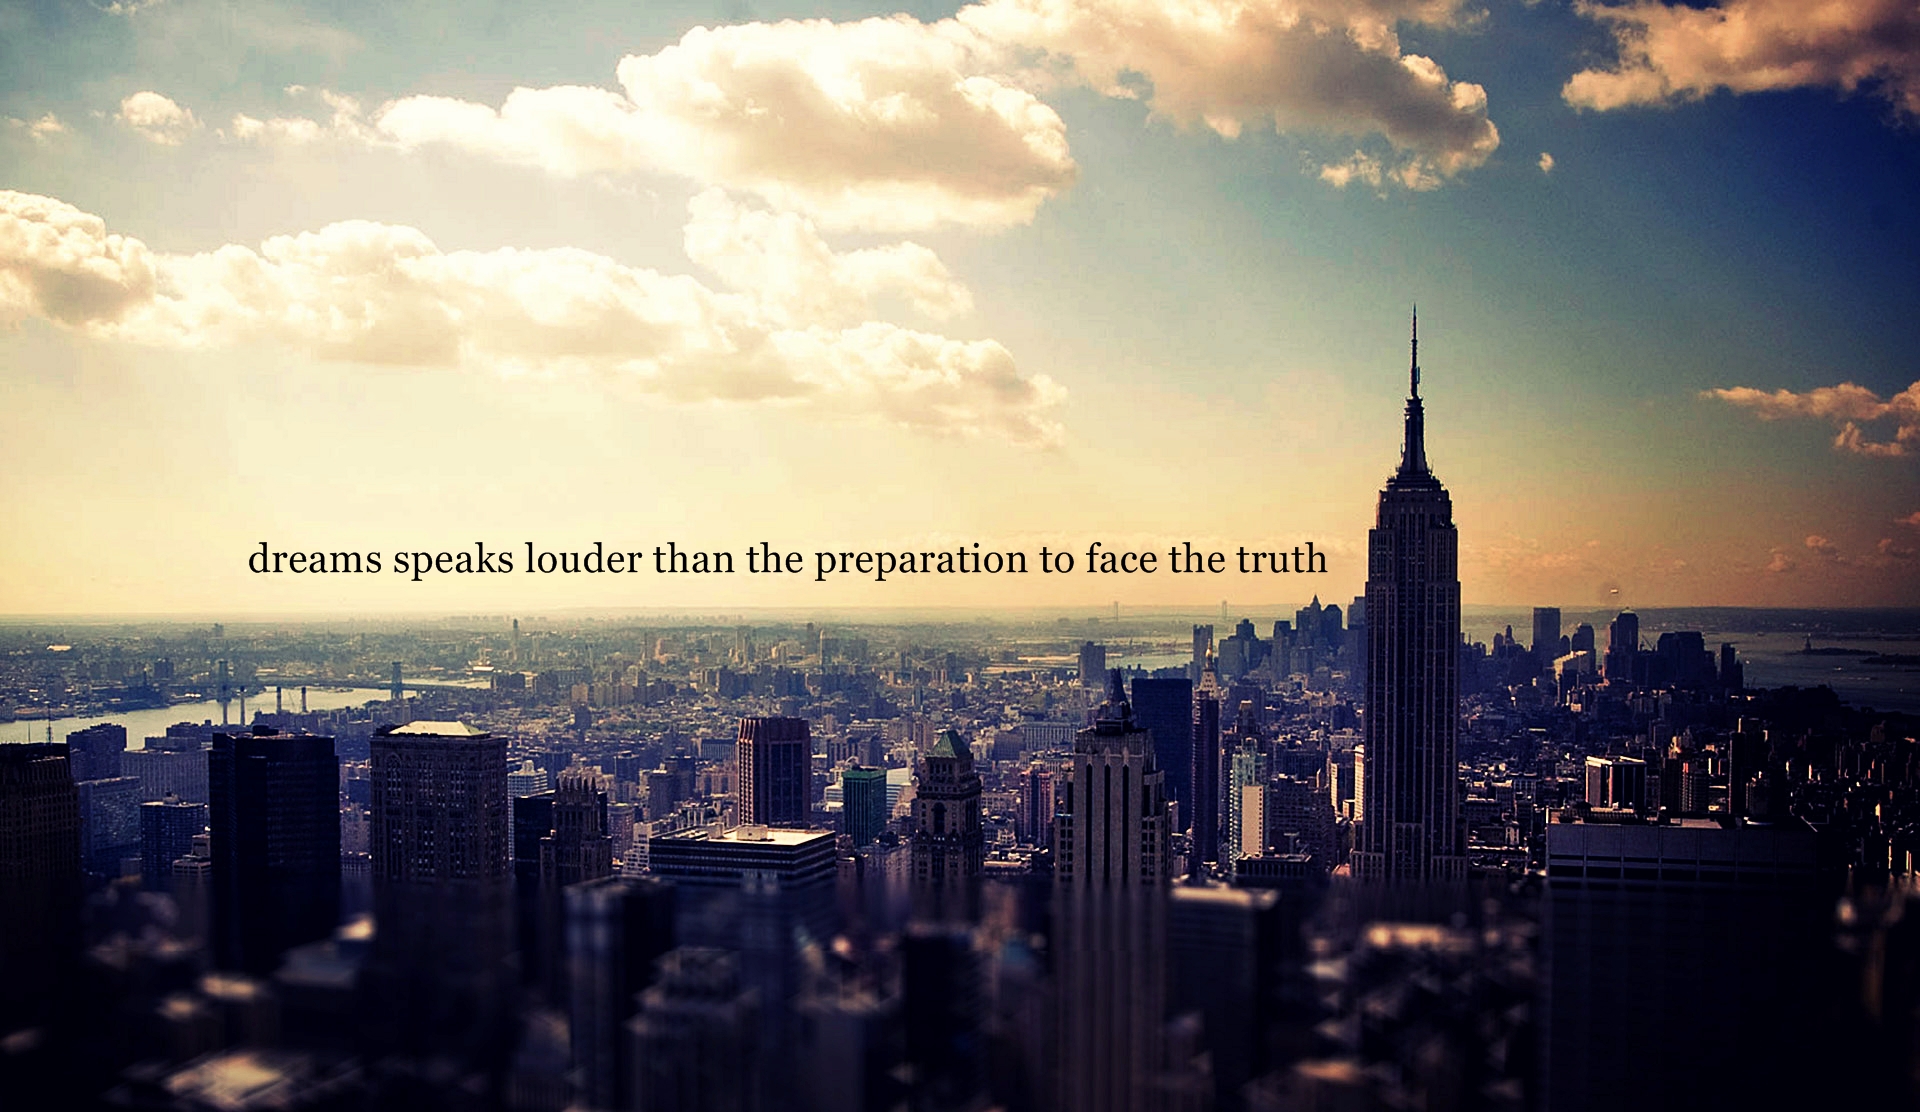 Dreams Speaks Louder Than The Preparation To Face The Truth